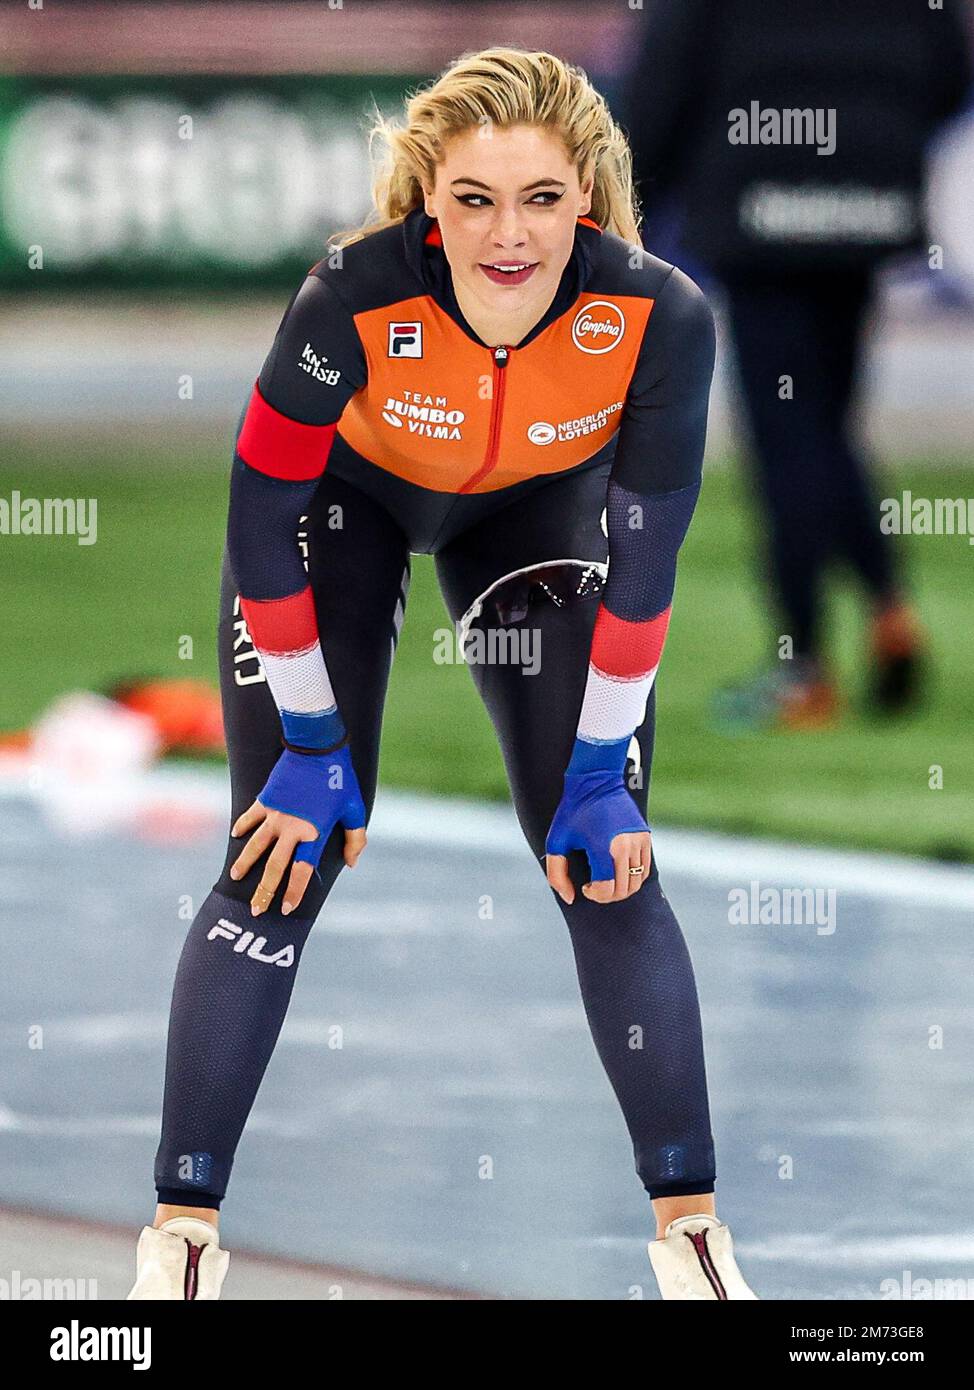 HAMAR - Jutta Leerdam (NED) in the women's 1000 meters sprint during the  ISU European Speed Skating Championships at the Hamar Olympic Hall on  January 7, 2023 in Hamar, Norway. ANP VINCENT